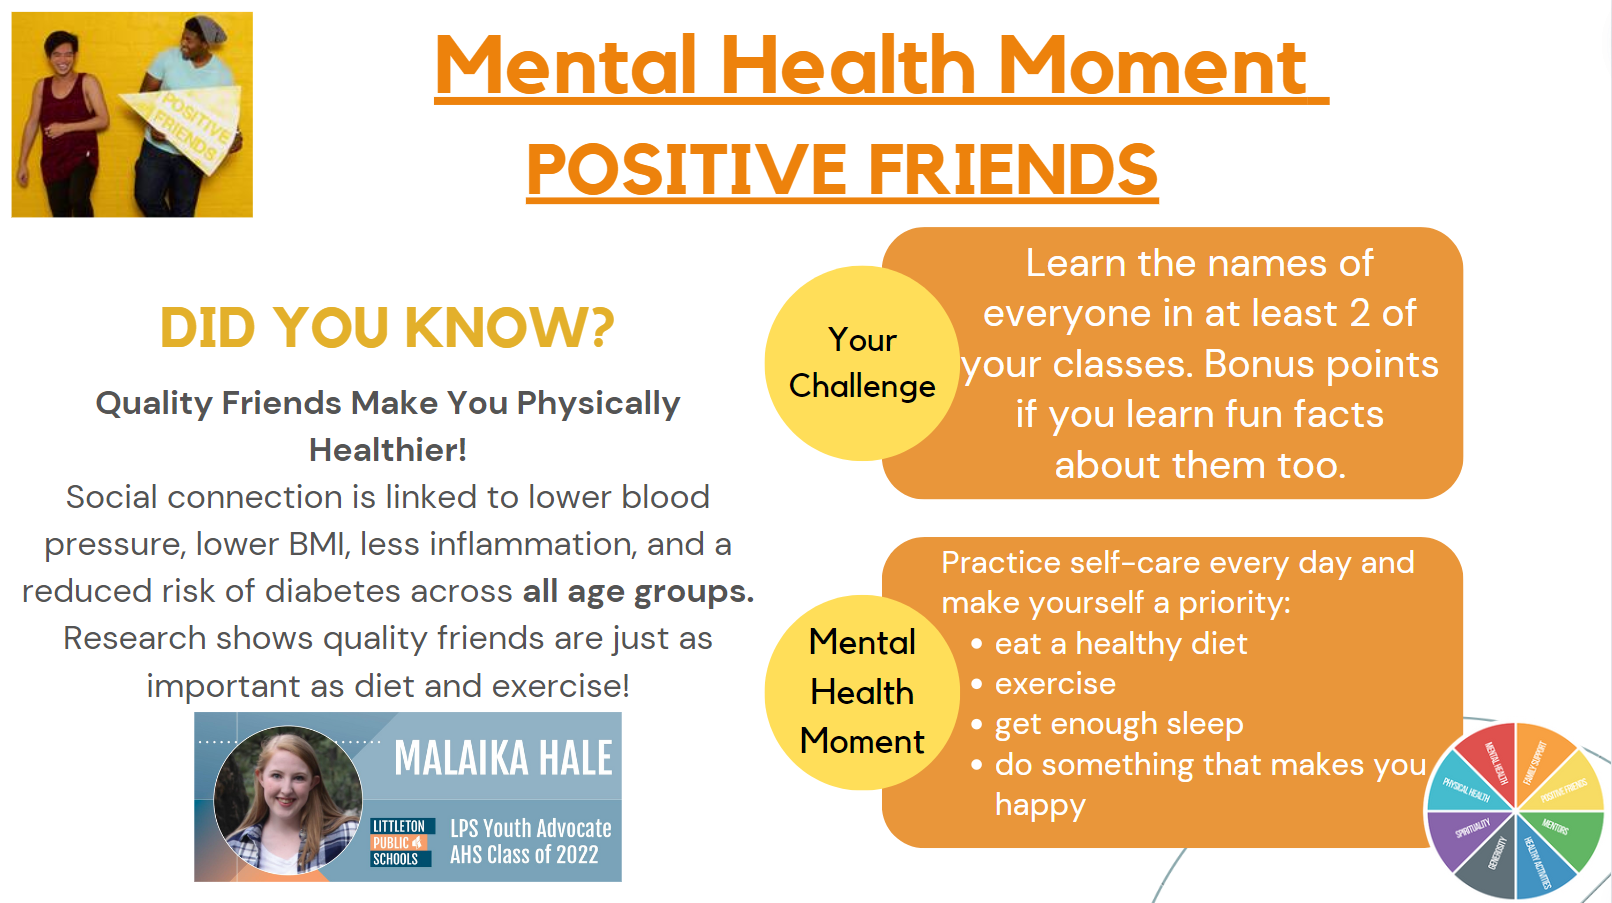 Mental Health Moment: POSITIVE FRIENDS Malaika Hale, LPS Youth Advocate, AHS Class of 2022  Did you know? Quality friends make you physically healthier! Social connection is linked to lower blood pressure, lower BMI, less inflammation, and a reduced risk of diabetes across all age groups. Research shows quality friends are just as important as diet and exercise!  Your Challenge Learn the names of everyone in at least 2 of your classes. Bonus points if you learn fun facts about them too.  Mental Health Moment Practice self-care every day and make yourself a priority: eat a healthy diet, exercise, get enough sleep, and do something that makes you happy.